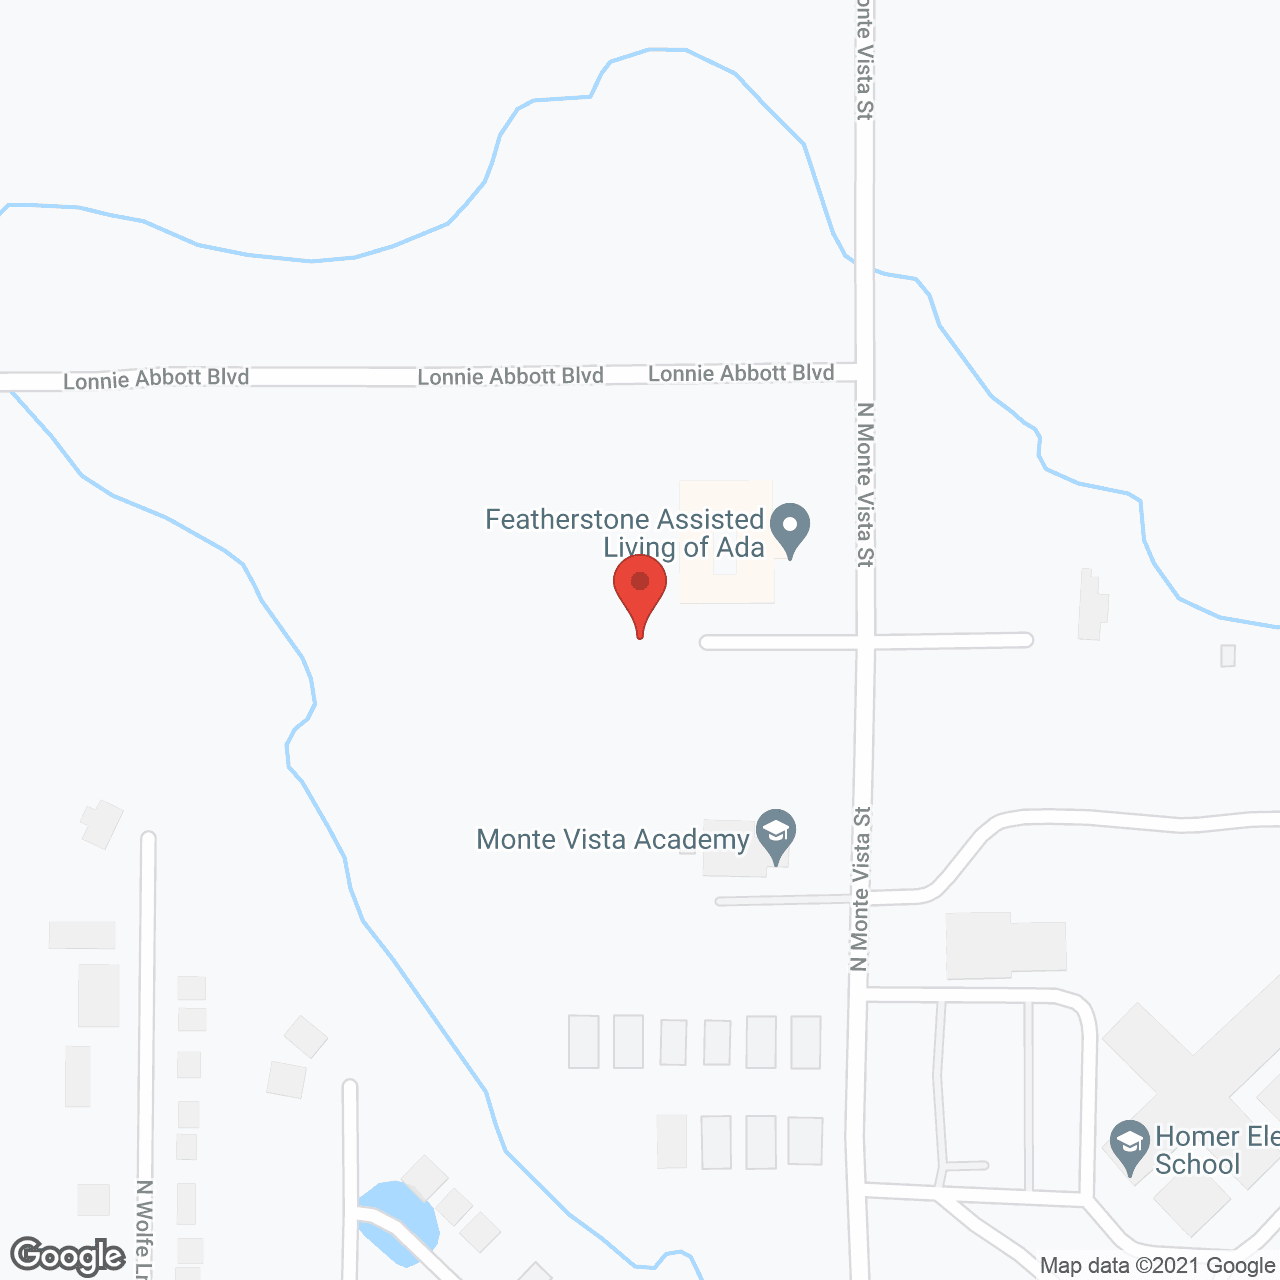 Featherstone Assisted Living of Ada in google map